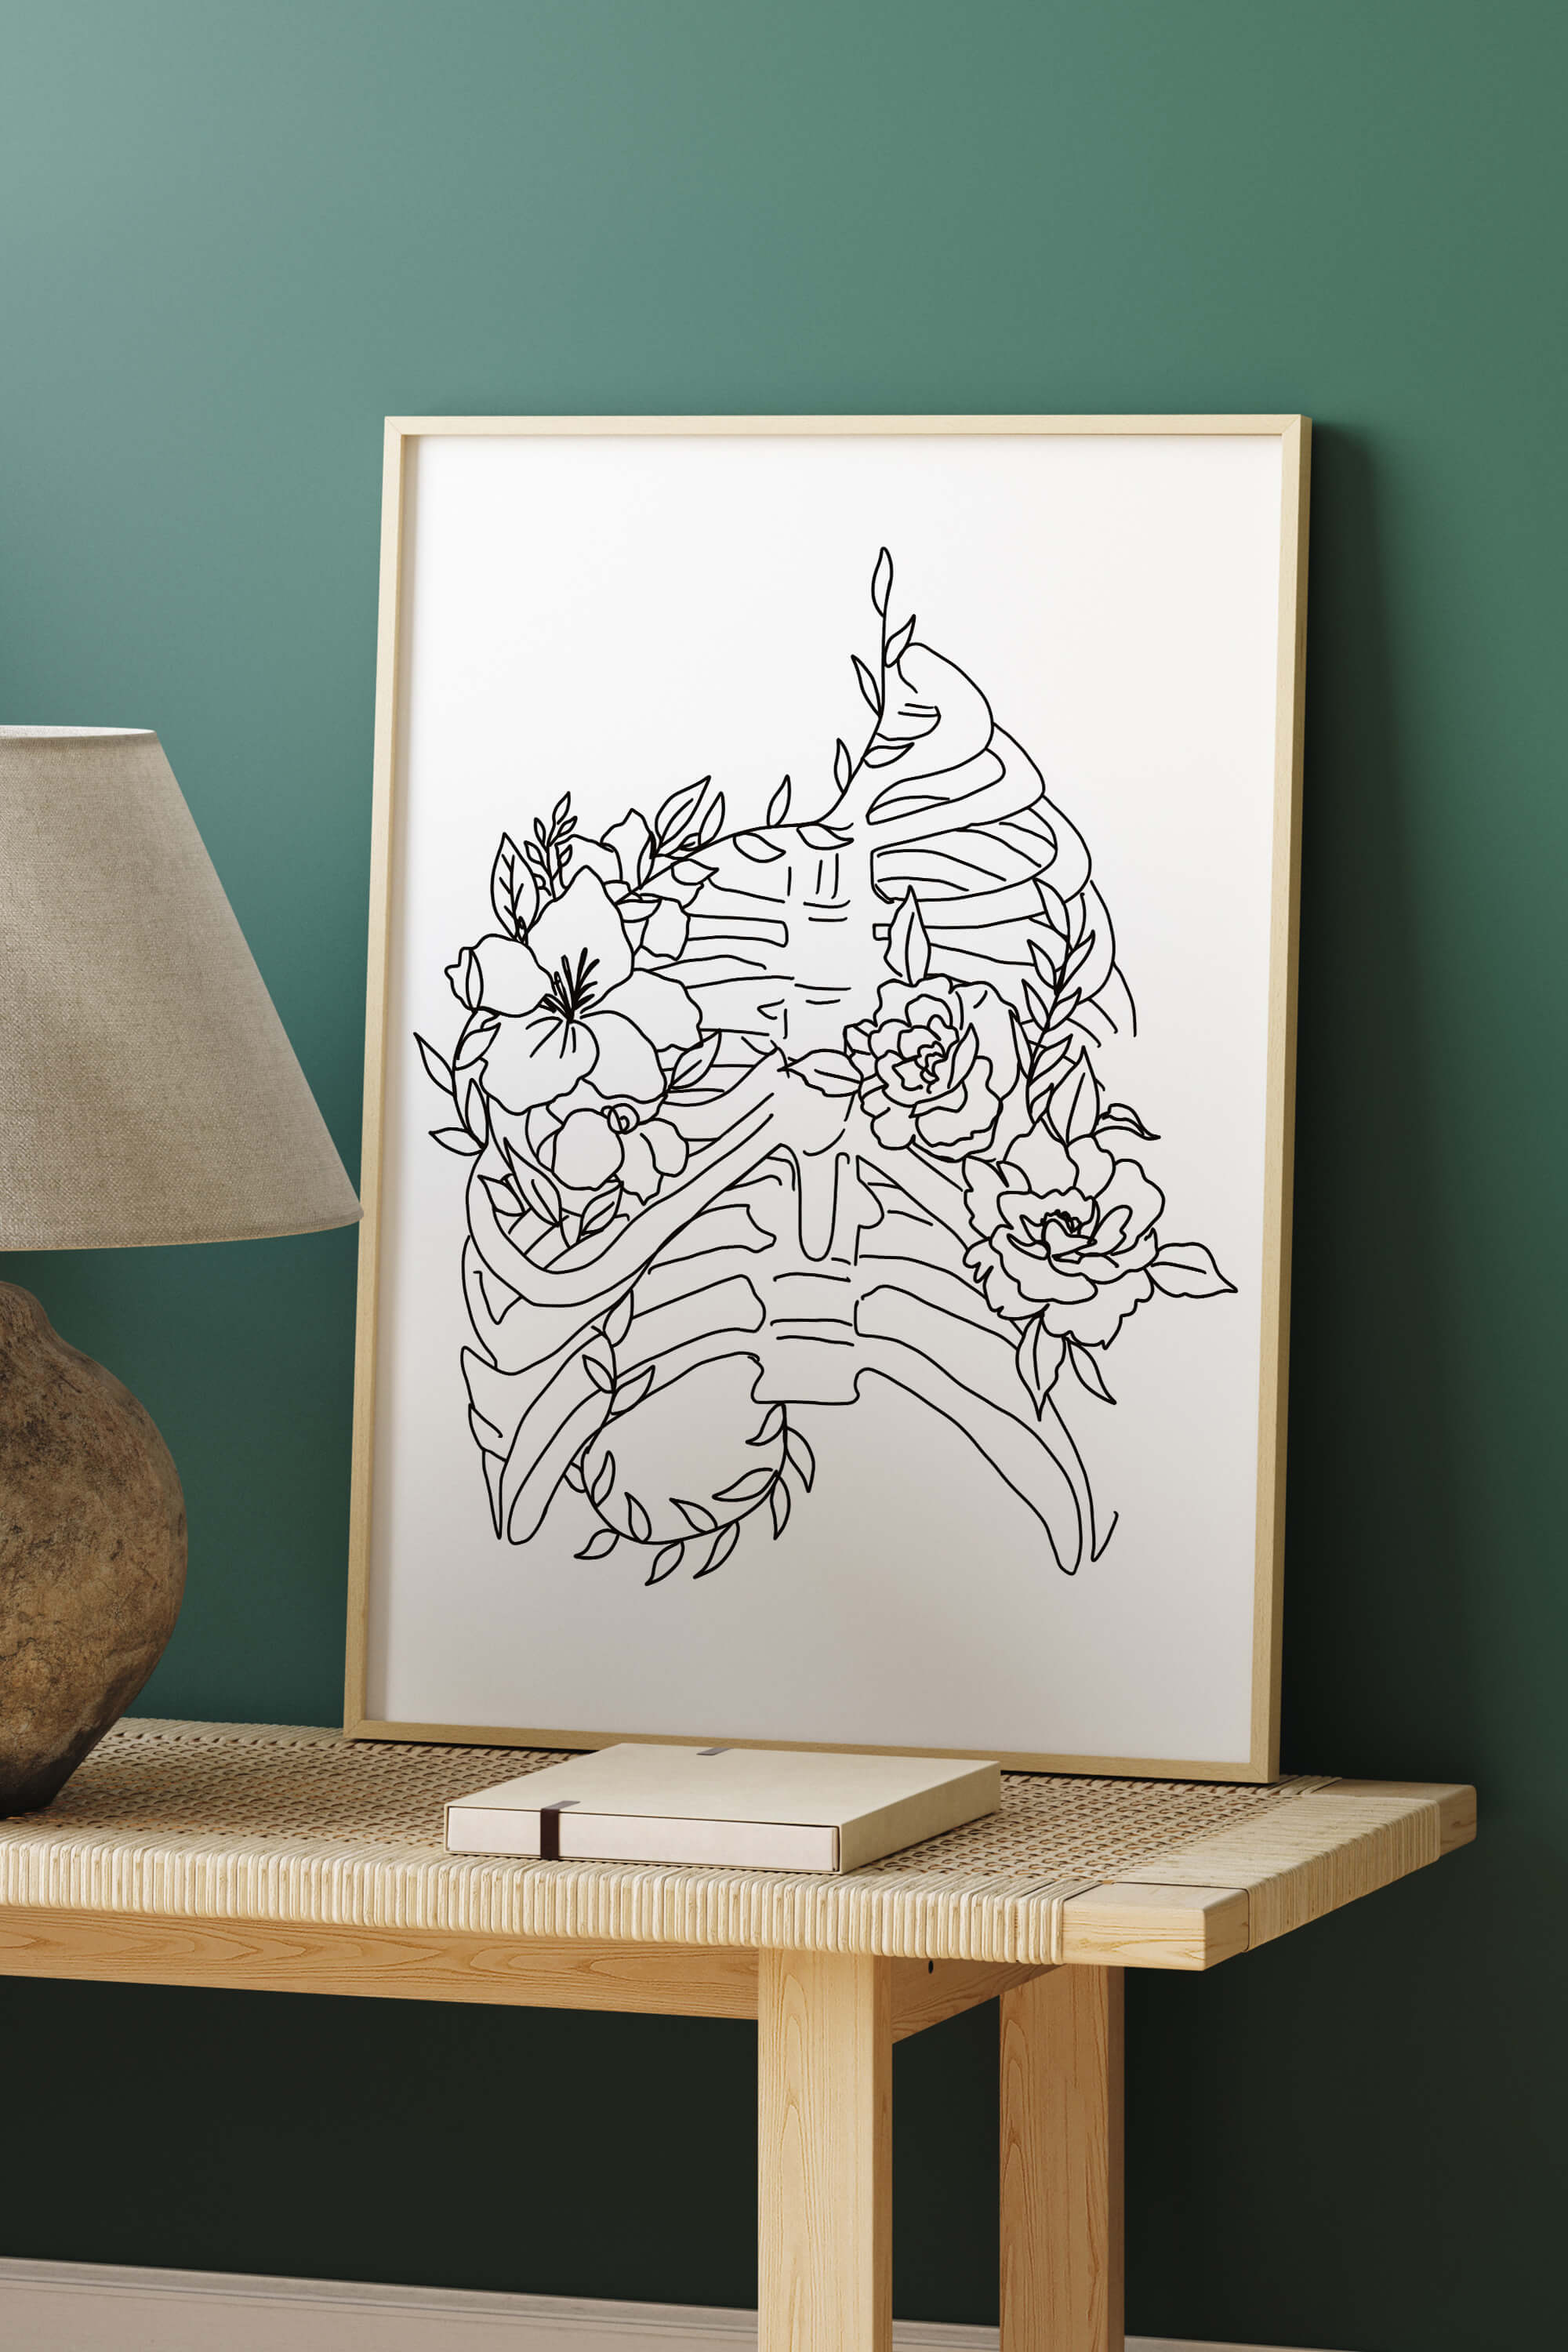 Therapeutic monochrome art print, seamlessly integrating skeletal elegance with floral elements. Promotes tranquility and reflection in any space. 